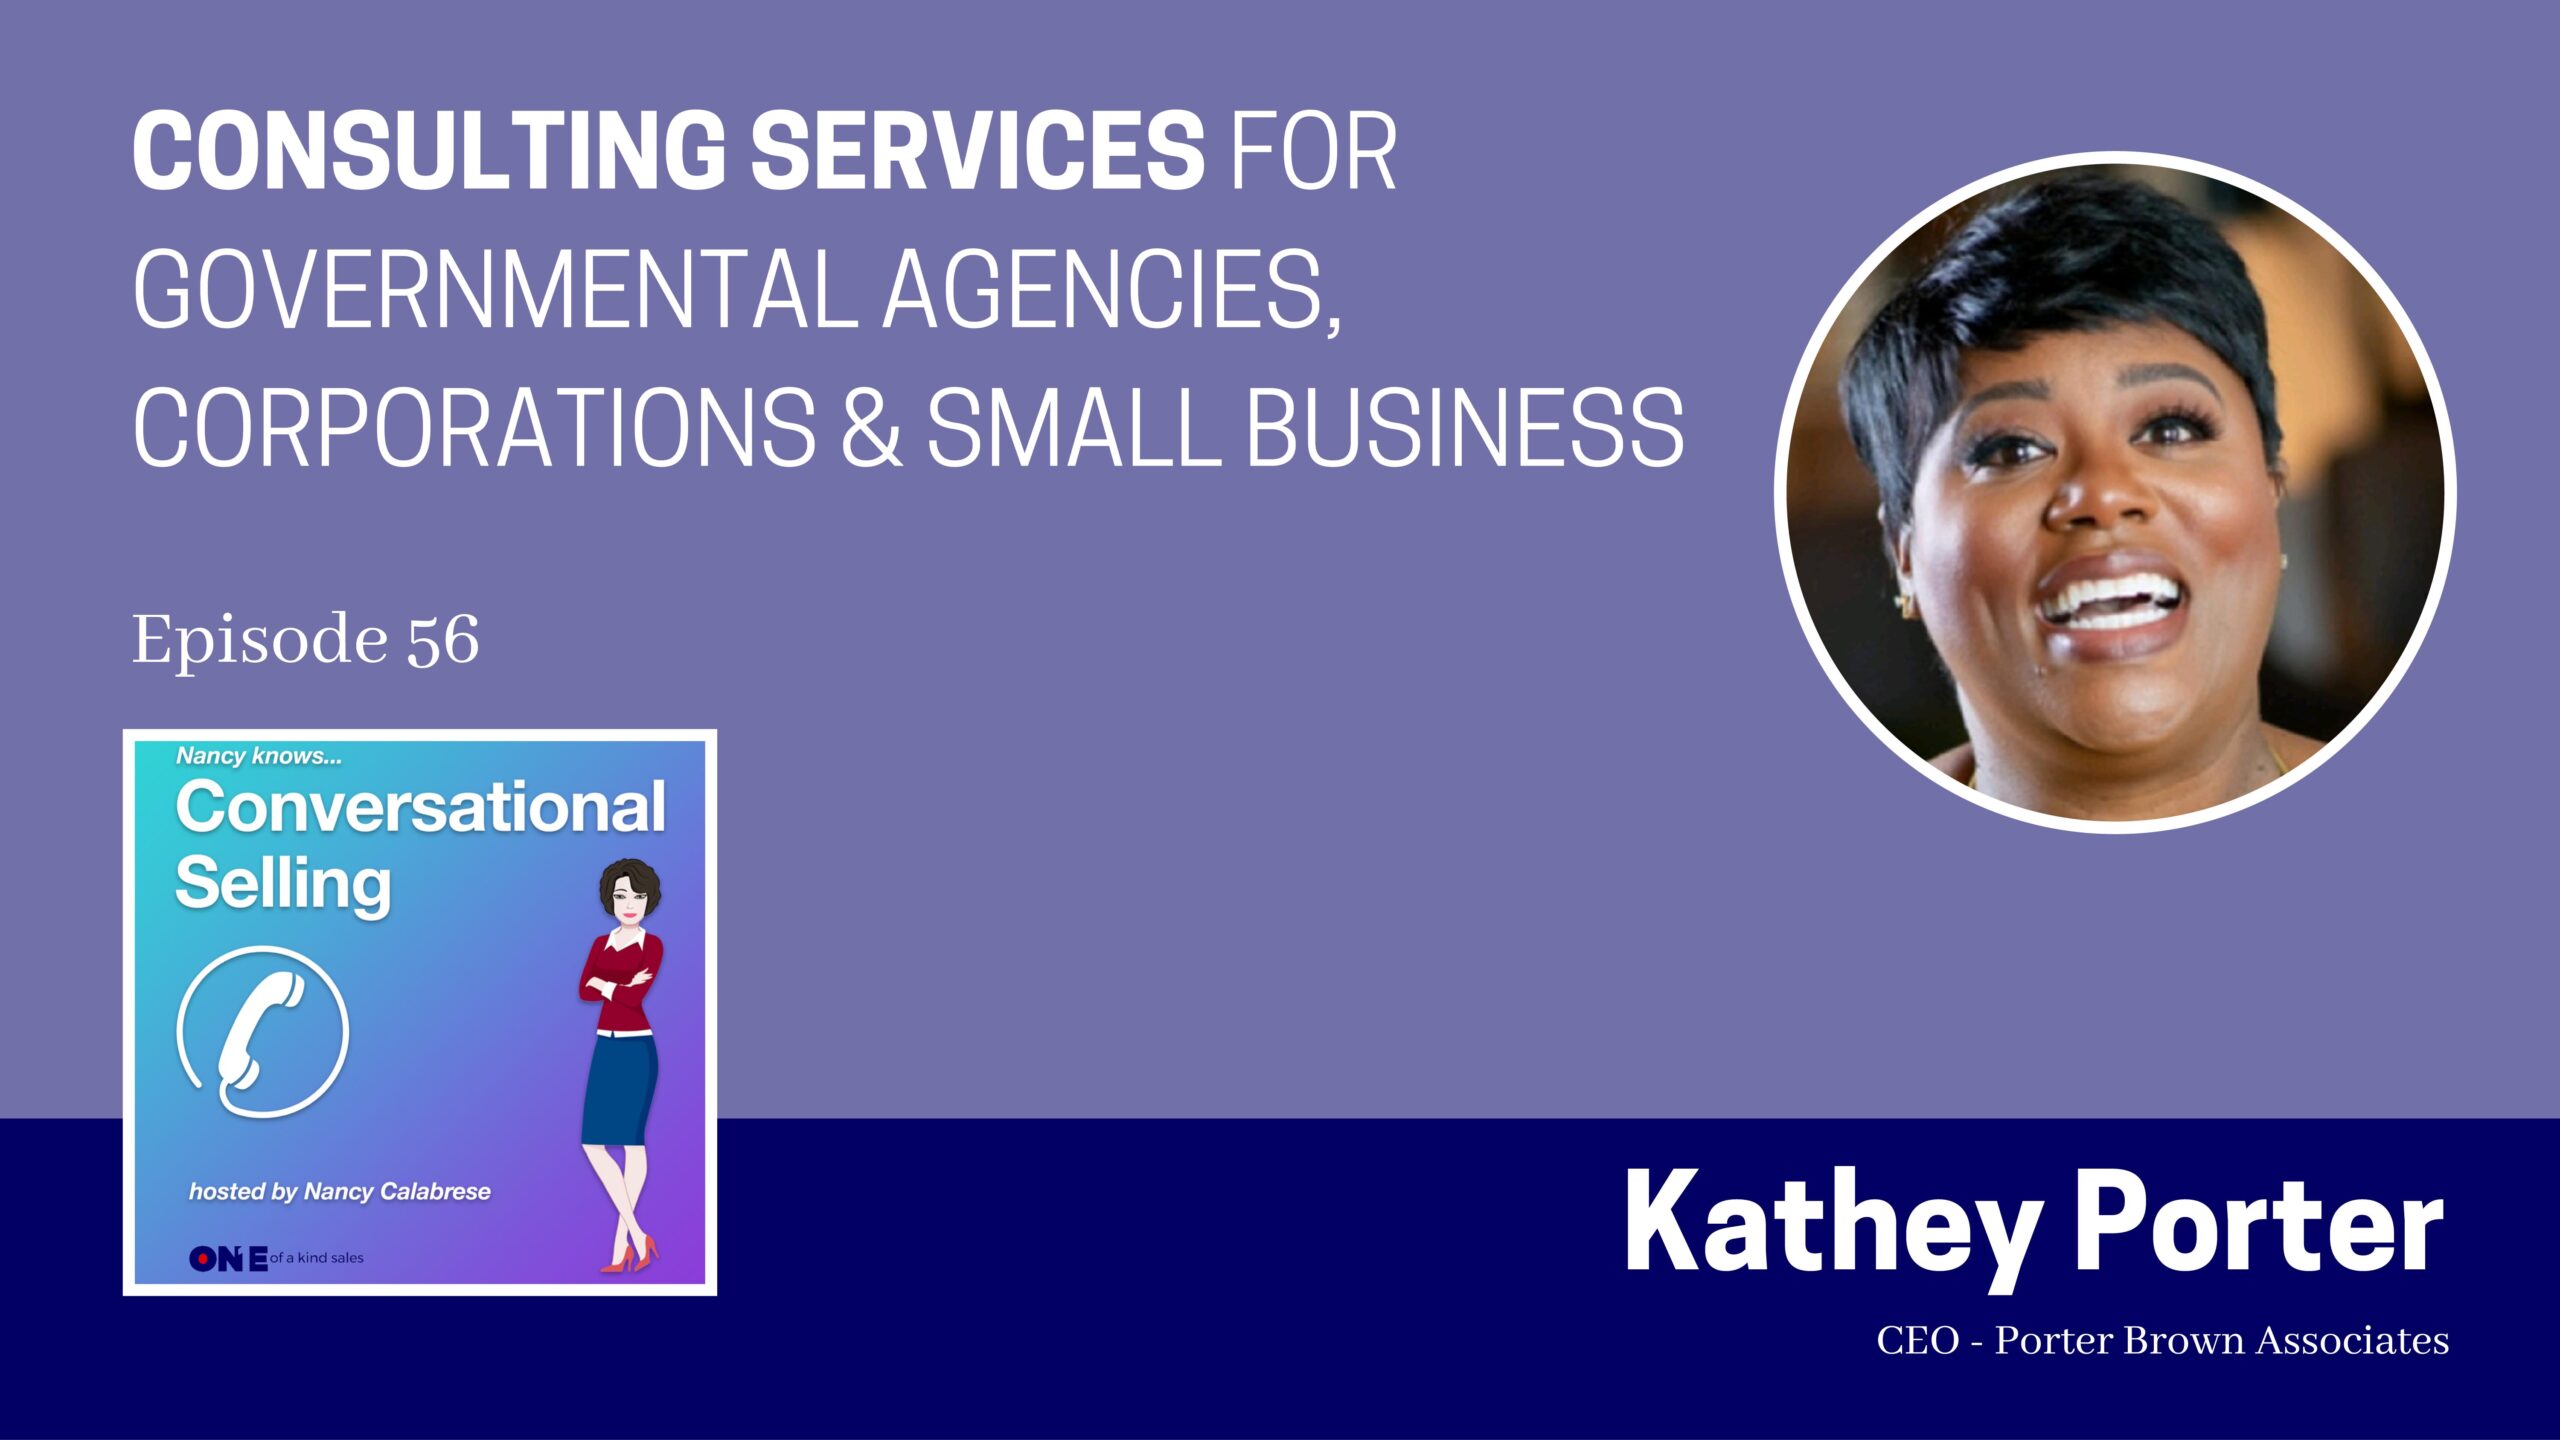 Kathey Porter | Consulting Services For Governmental Agencies, Corporations & Small Business